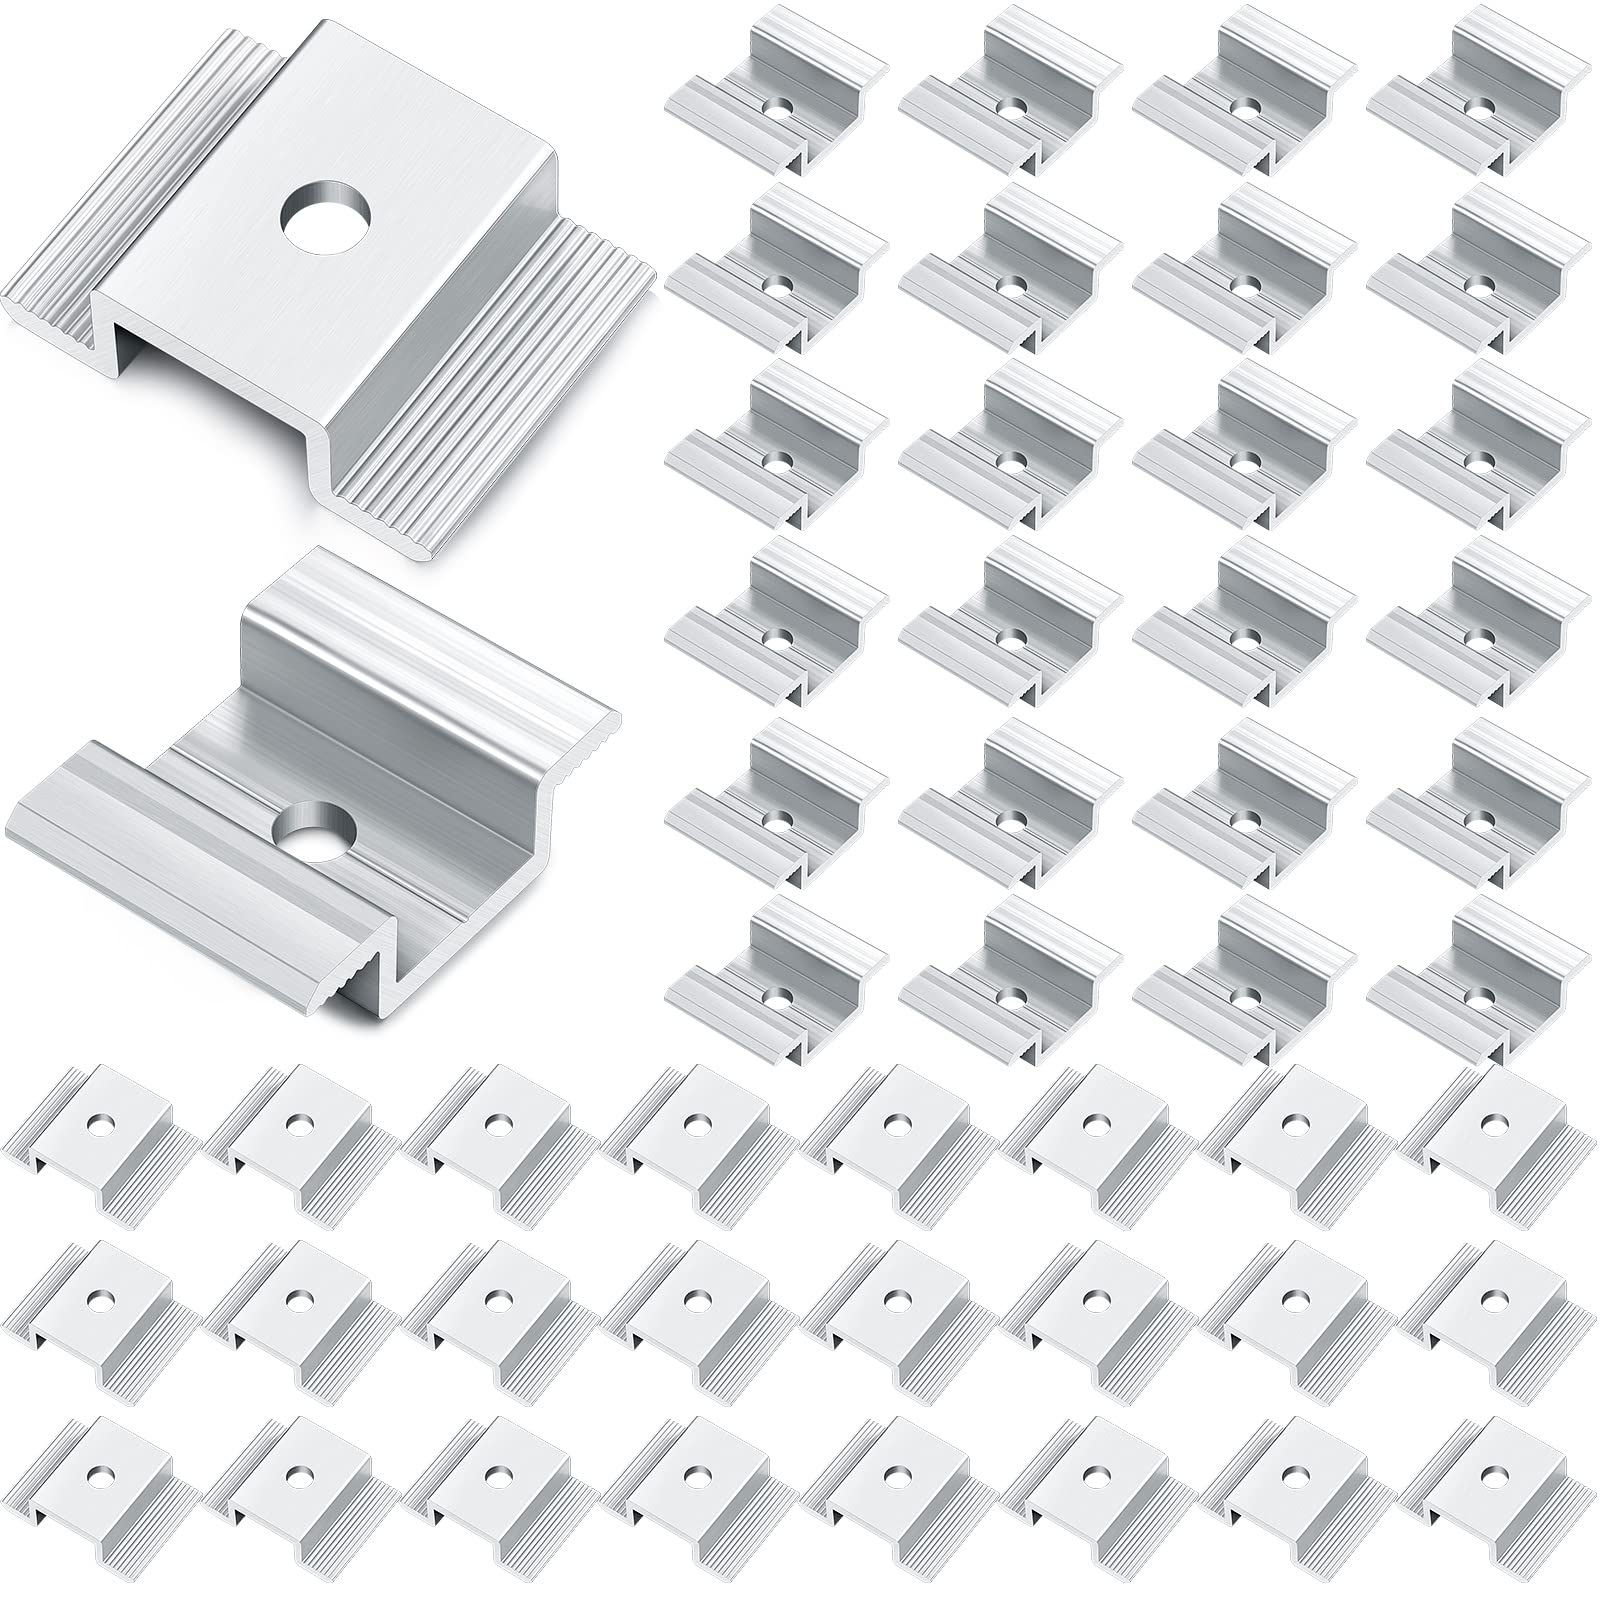 Zhengmy Solar Panel Mid Clamps 1.06 Inch Solar Panel Bracket Aluminium Mounting Accessories Aluminum Solar Mid Clamp for Solar Panel Mounting Solar Panel Mid Clamp (48 Pack)